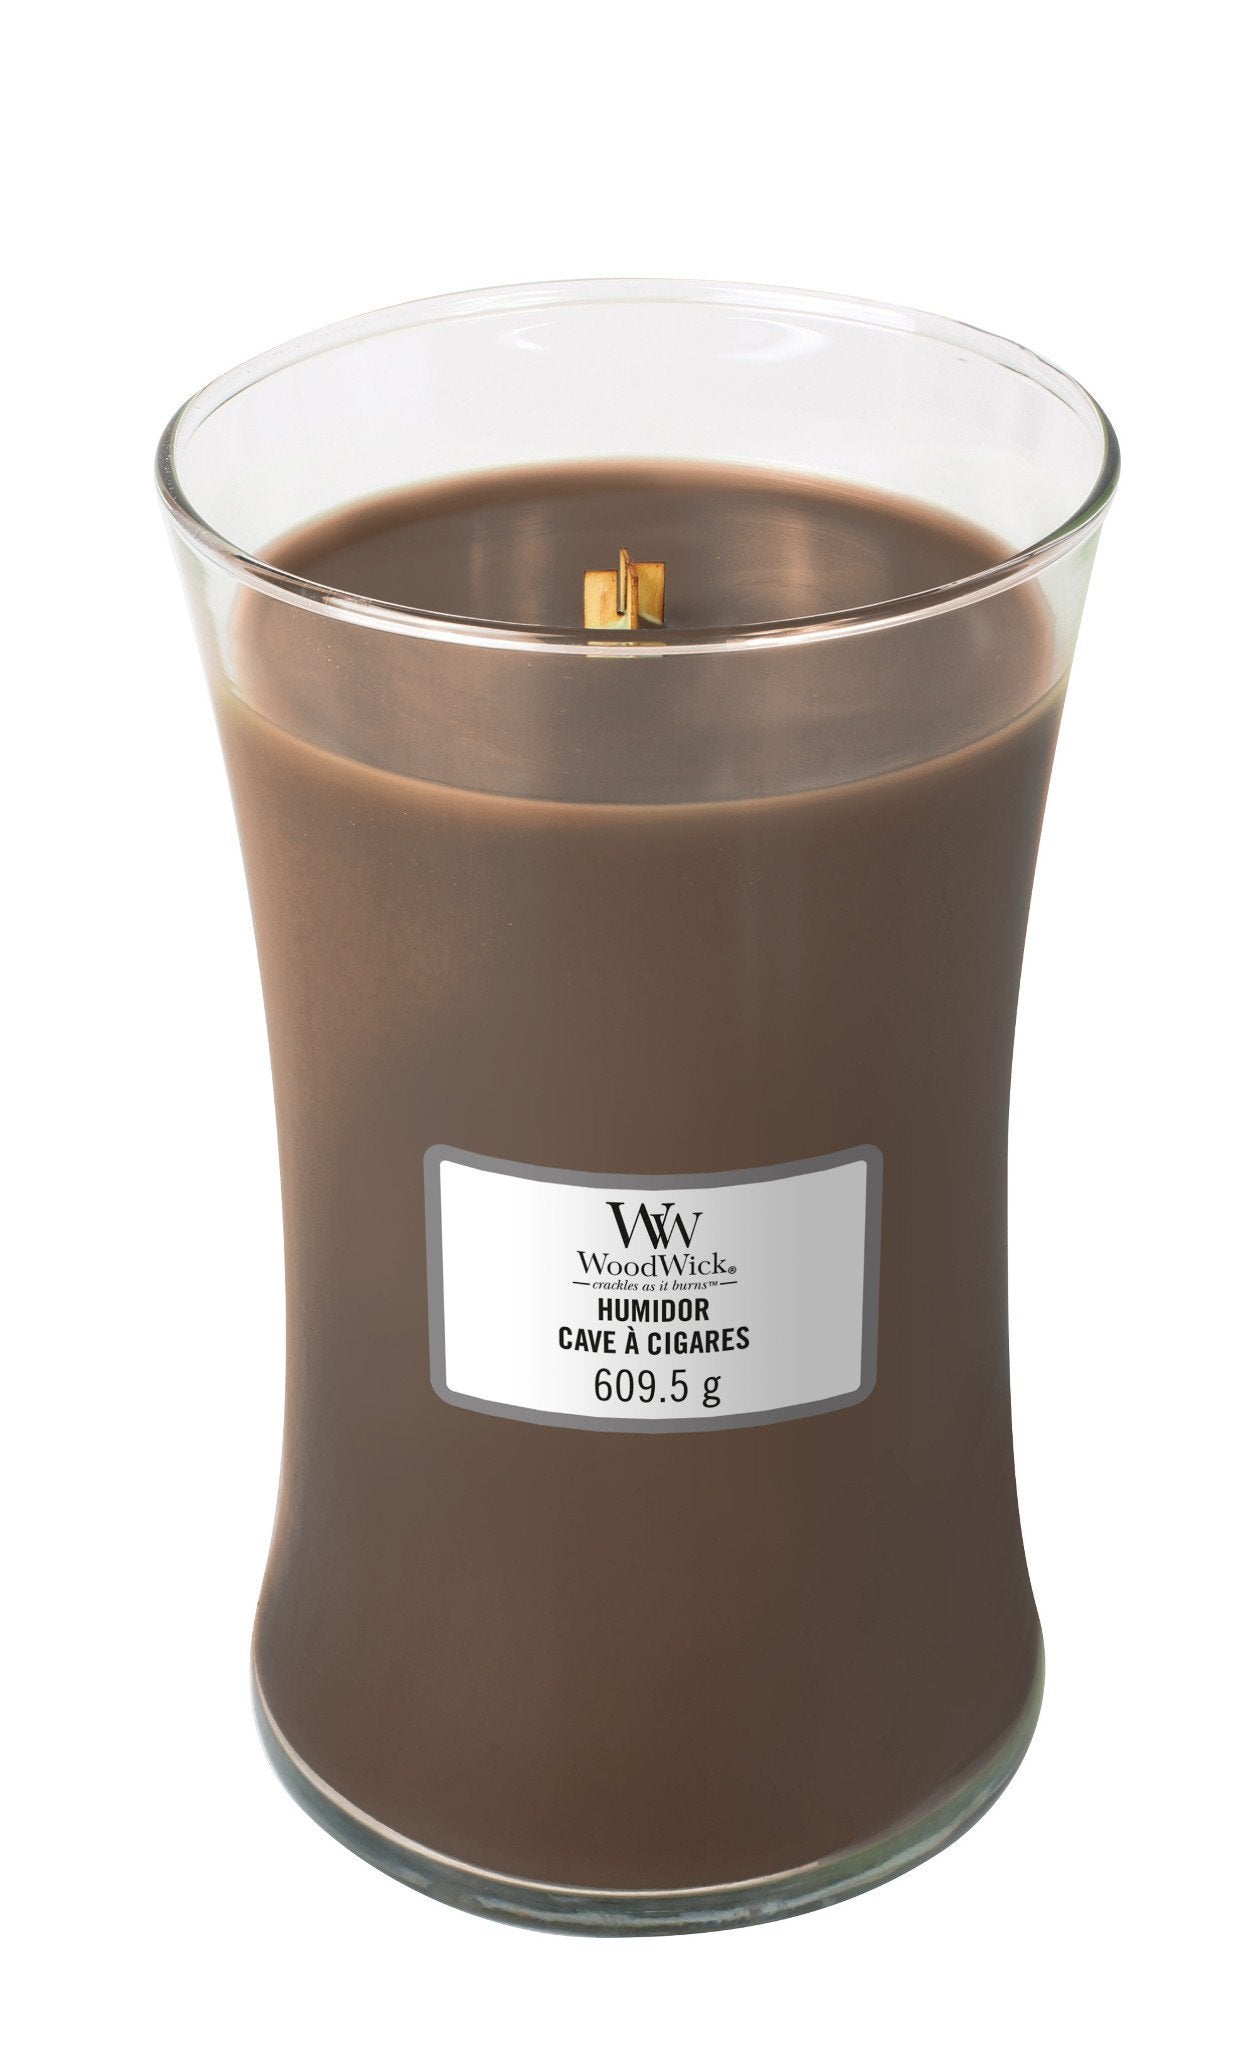 Woodwick - Candela Grande Humidor - Home and Glam